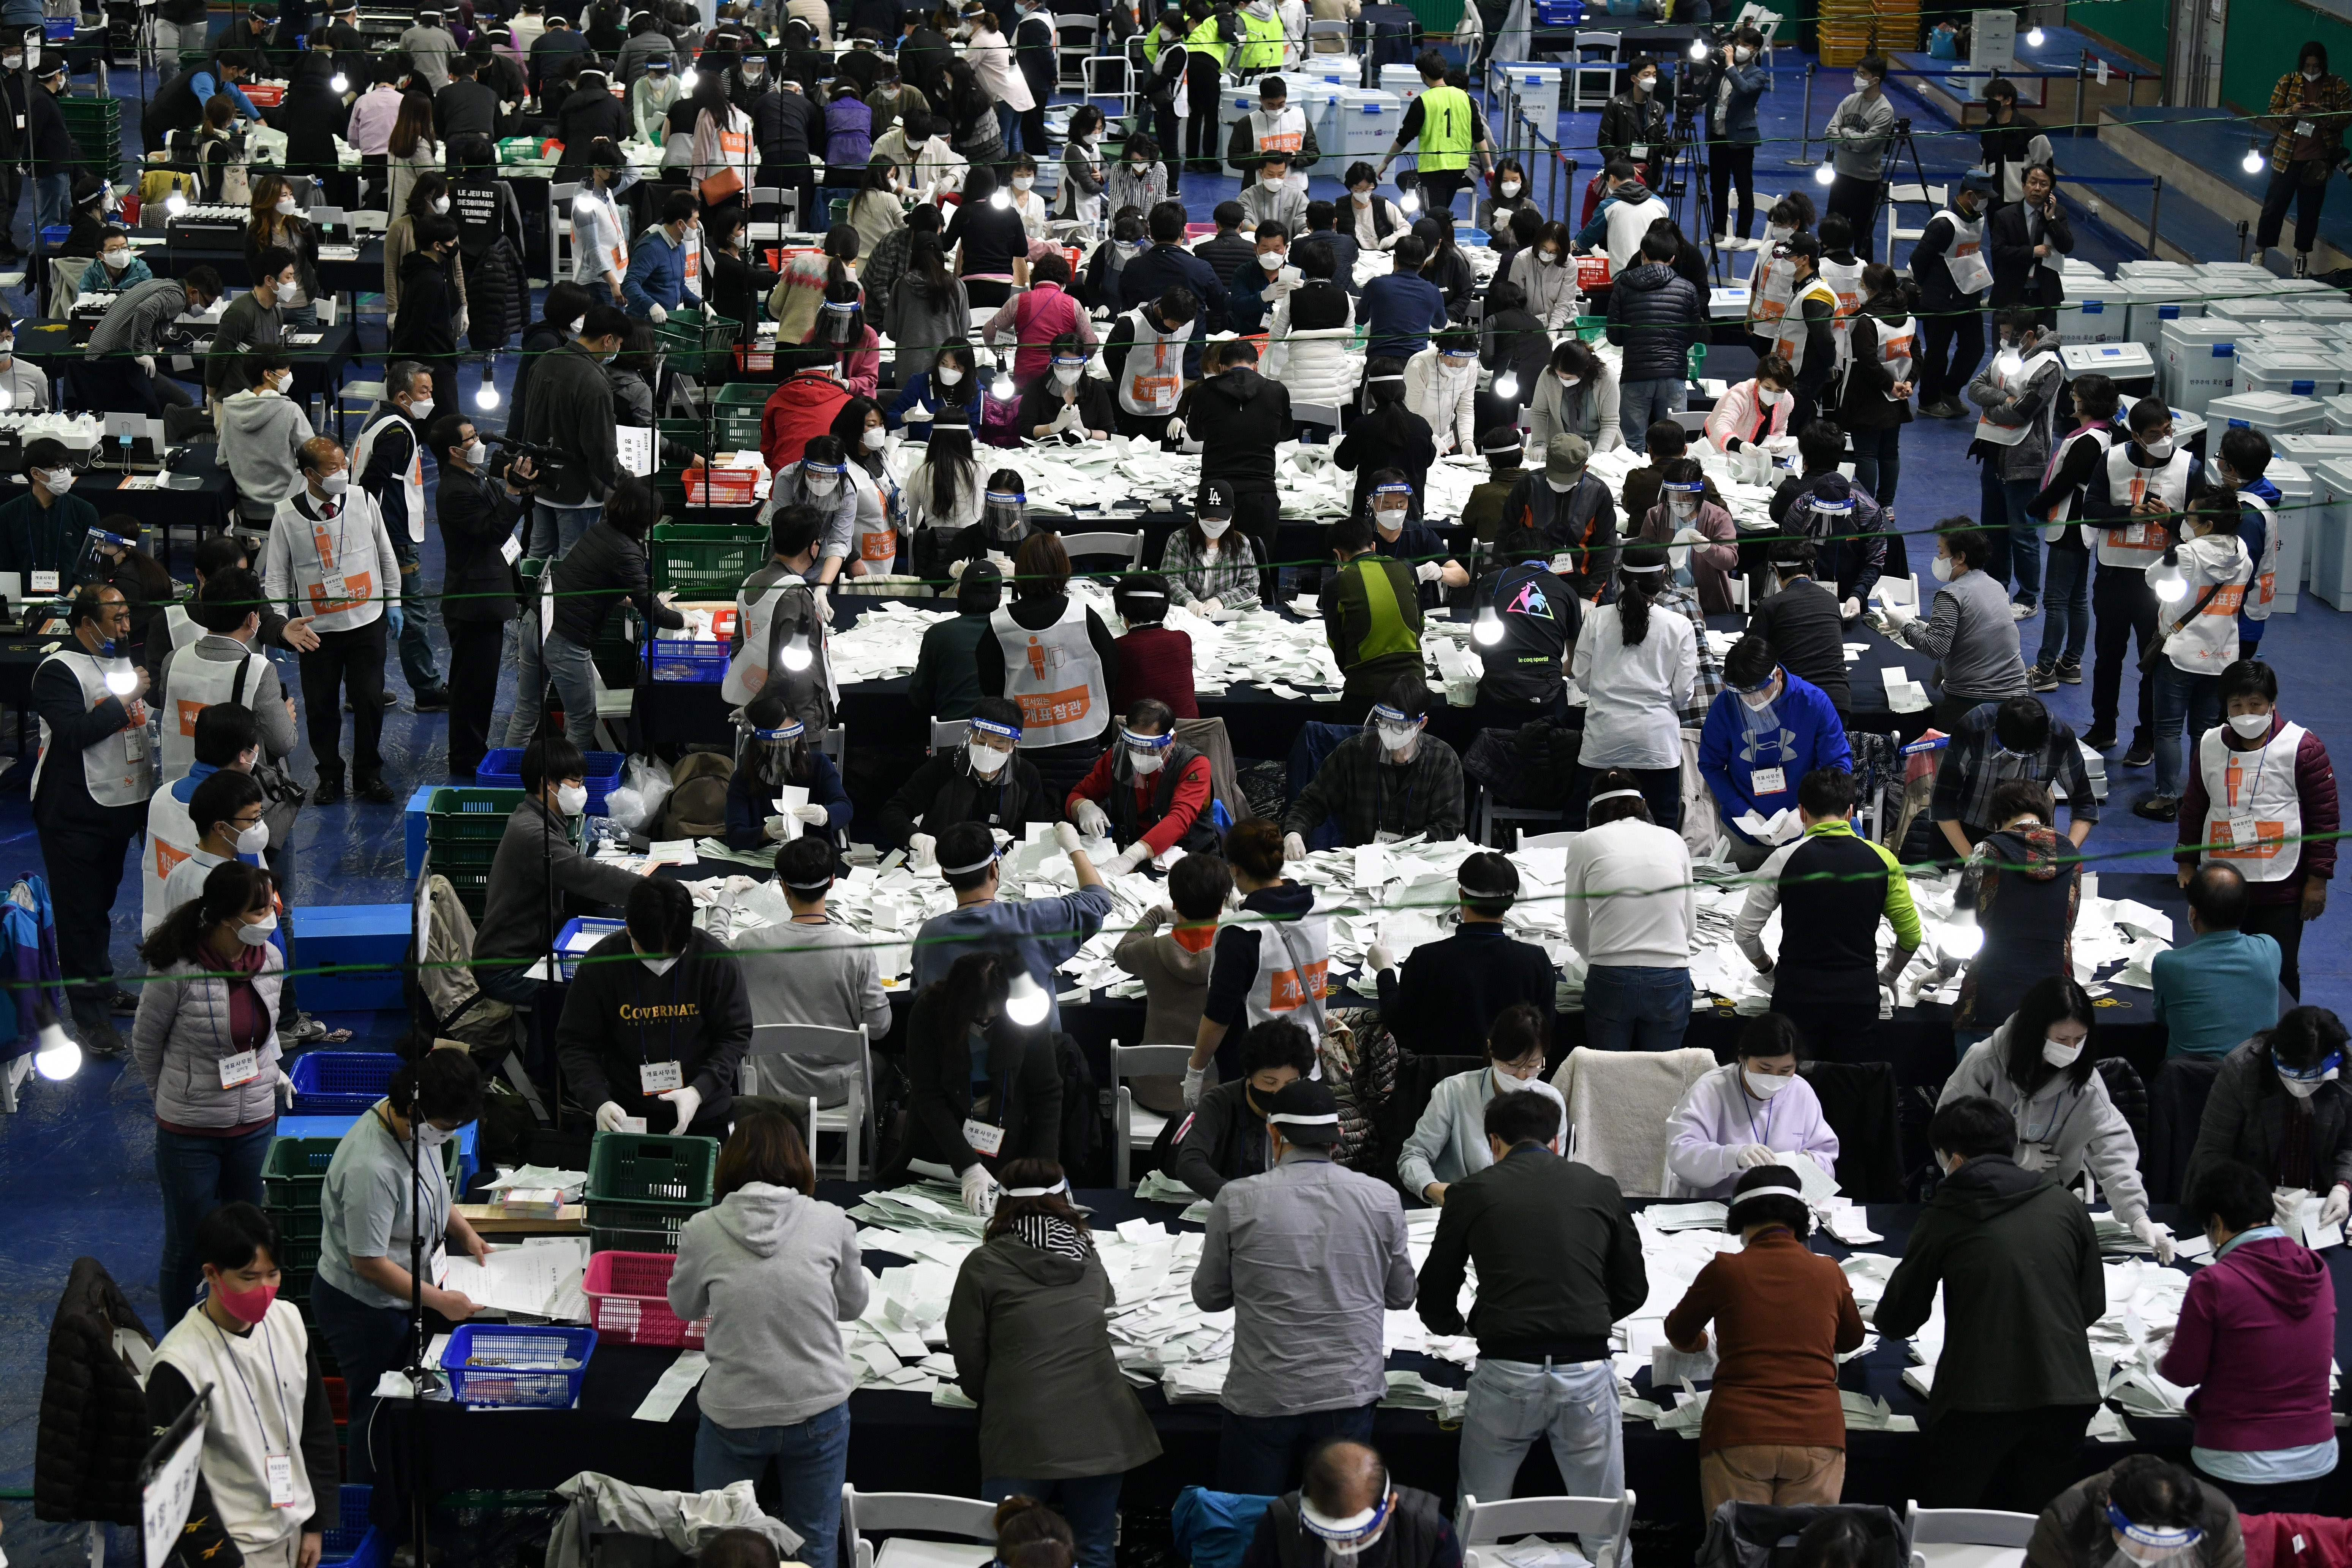 In this image, rows of people sort through papers on long tables